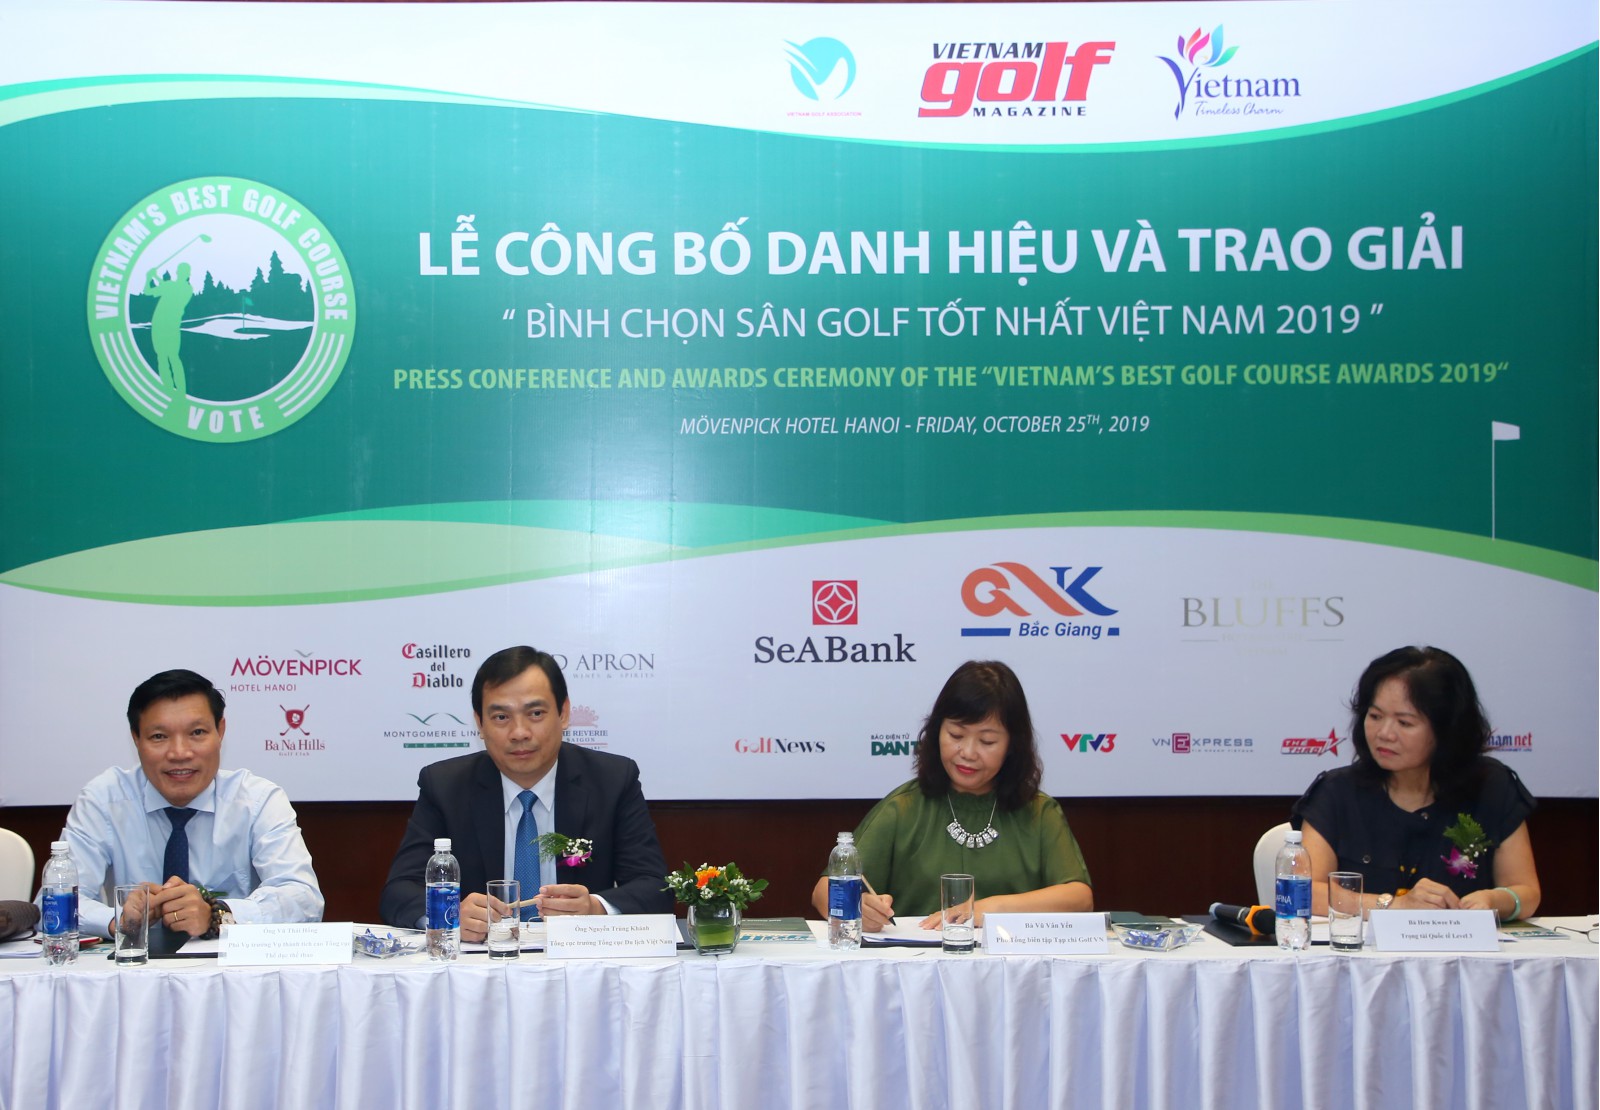 The Organisation Board:(from left to right) Mr. Vu Thai Hong - Vietnam Sports Administration, Mr. Nguyen Trung Khanh - Chairman of Vietnam Administration of Tourism, Mrs. Vu Van Yen - Deputy Editor-in-Chief of Vietnam Golf Magazine, Mrs. Hew Kwee Fah - USGA Accredited Golf Course Raters and R&A Level-3 referees